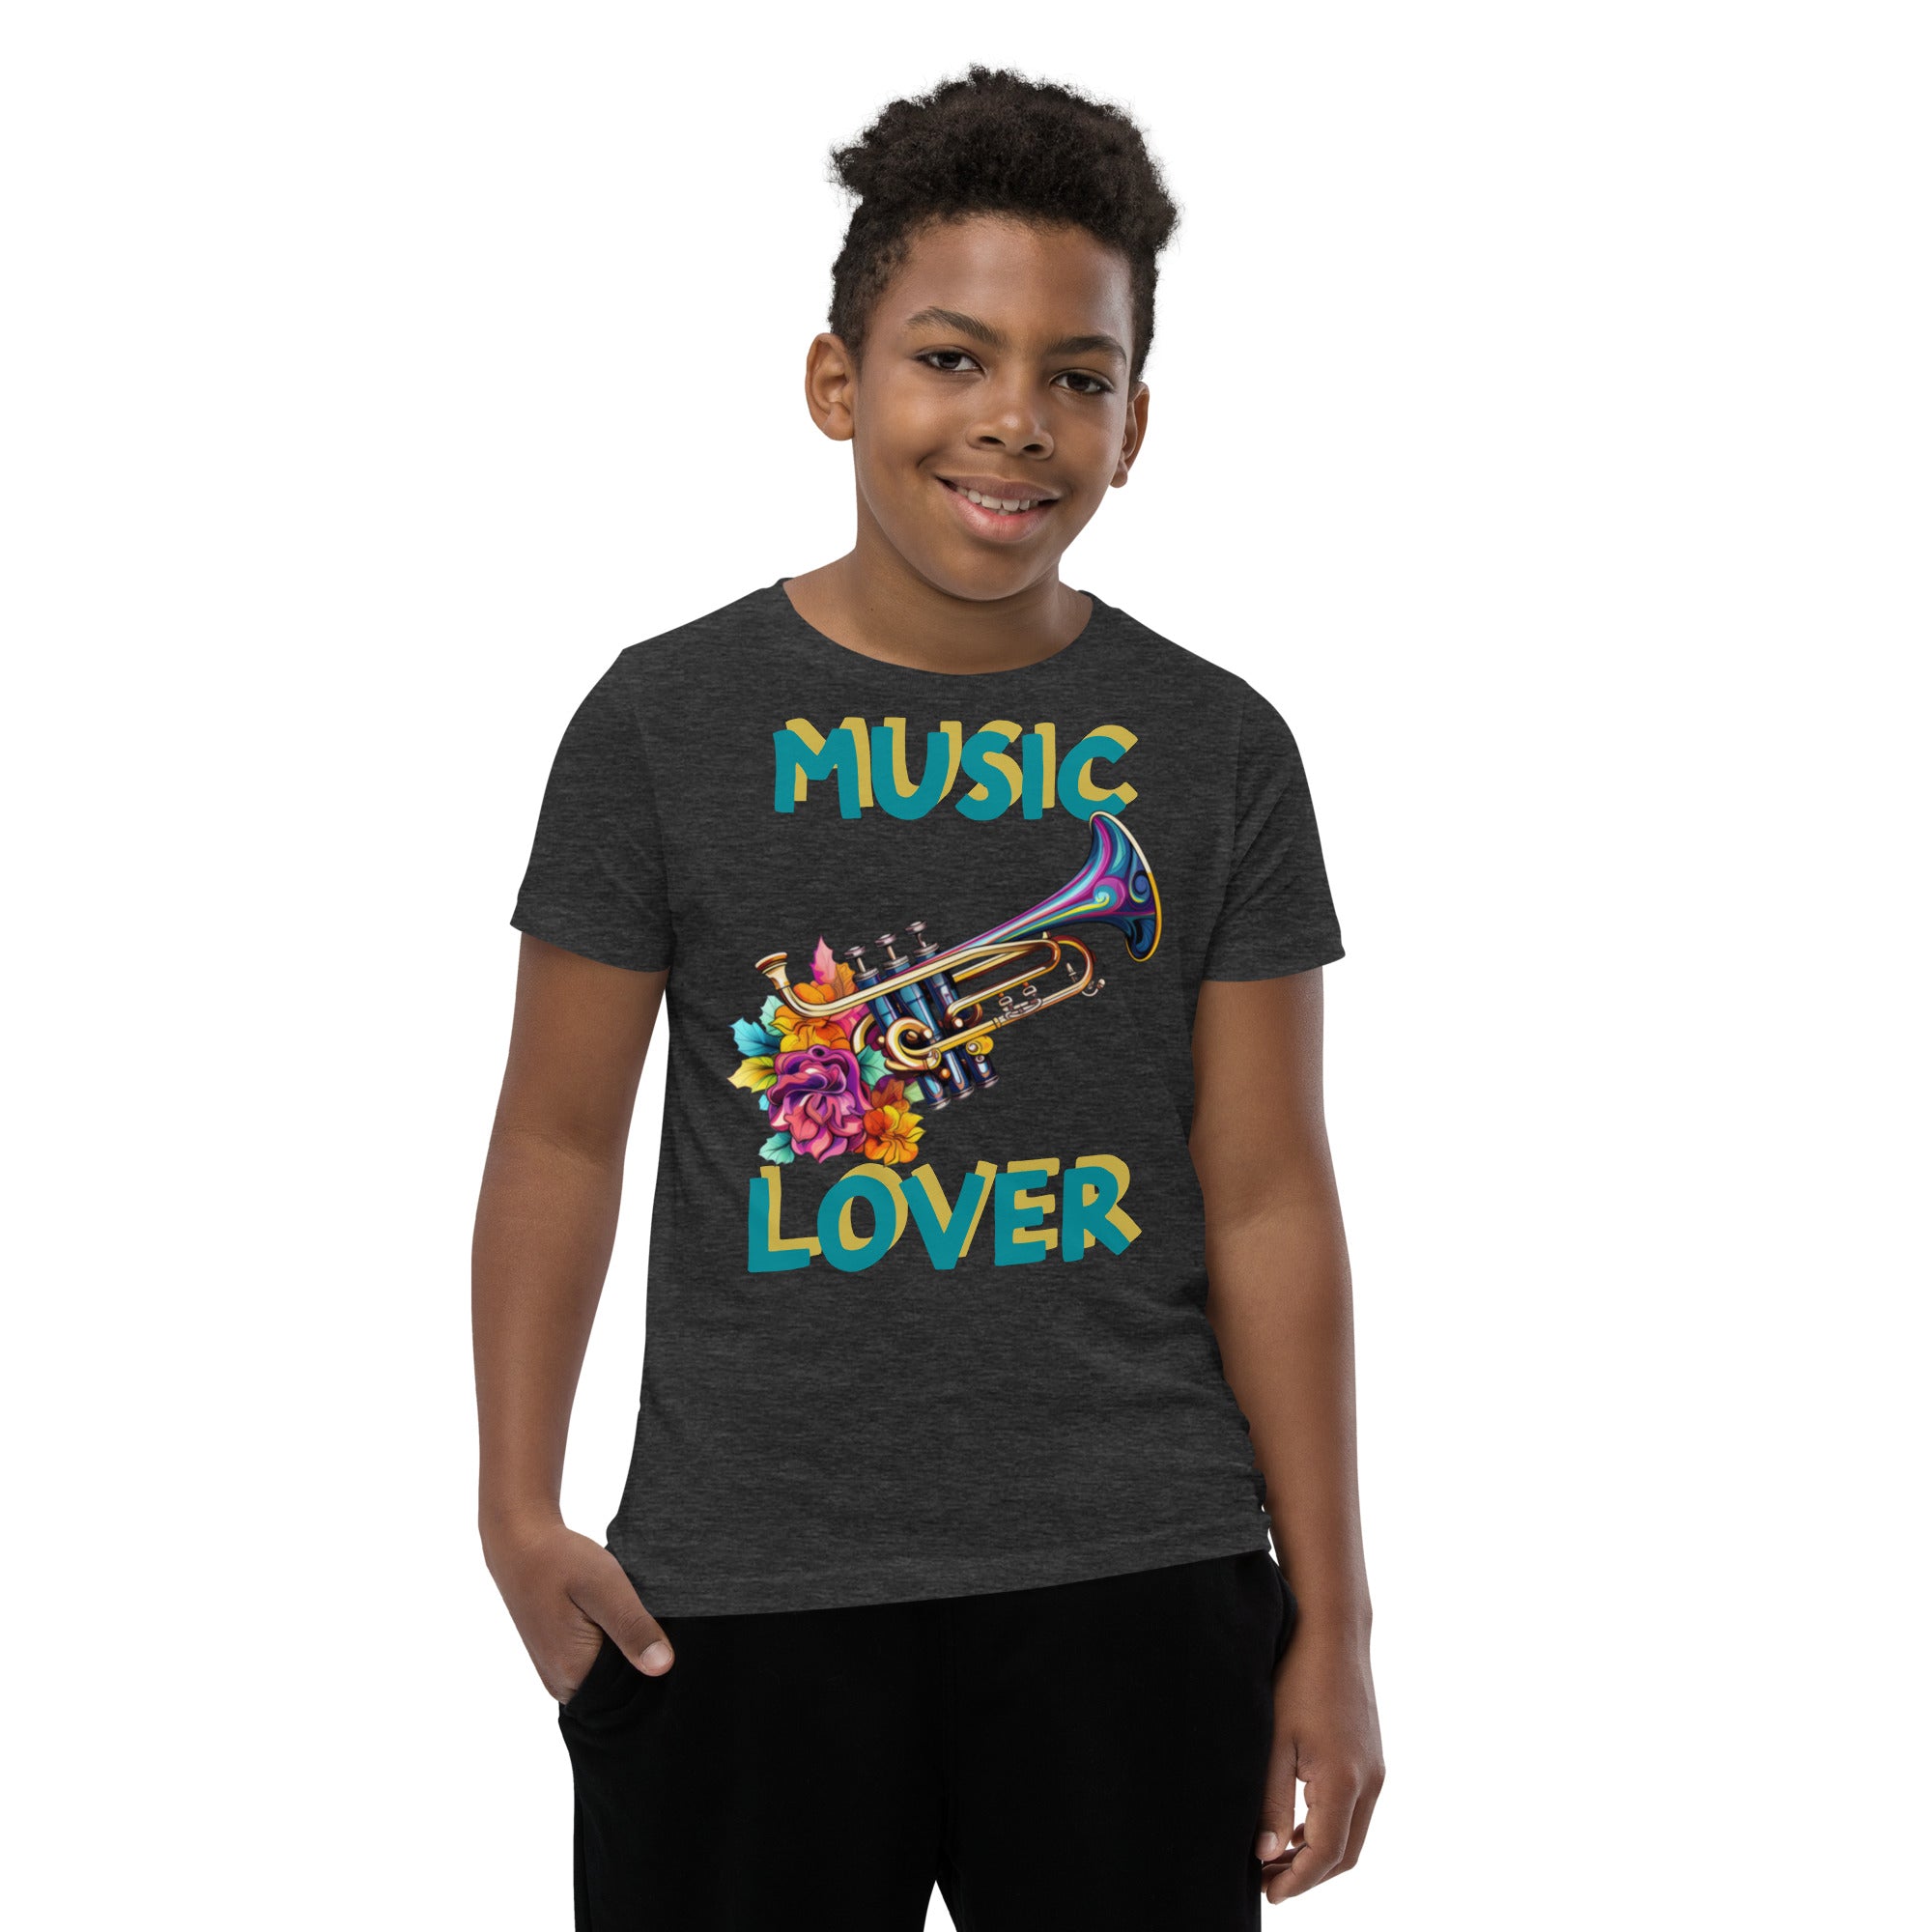 Youth Short Sleeve T-Shirt. Music Lover T Shirt, Back to School, Kids,